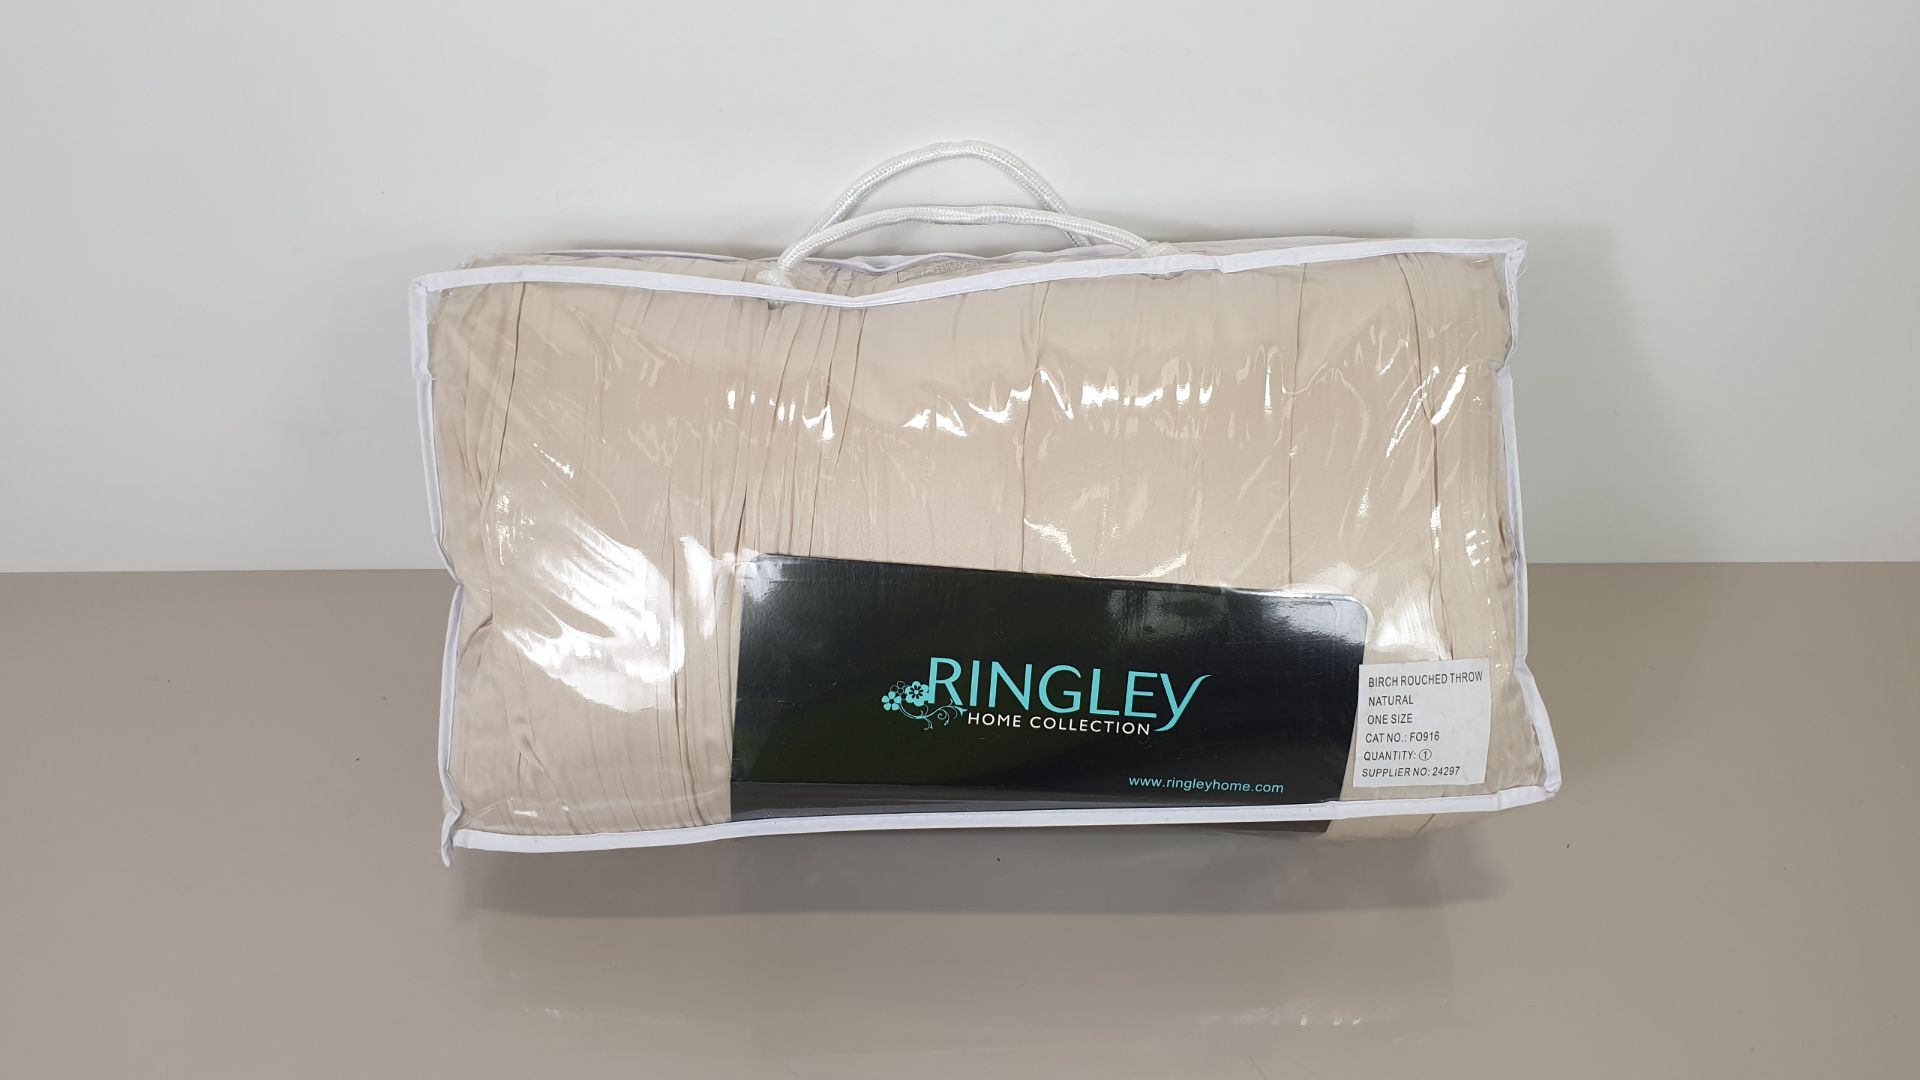 10 X BRAND NEW RINGLEYS HOME COLLECTION BIRCH ROUCHED THROWS COLOUR NATURAL IN 5 BOXES